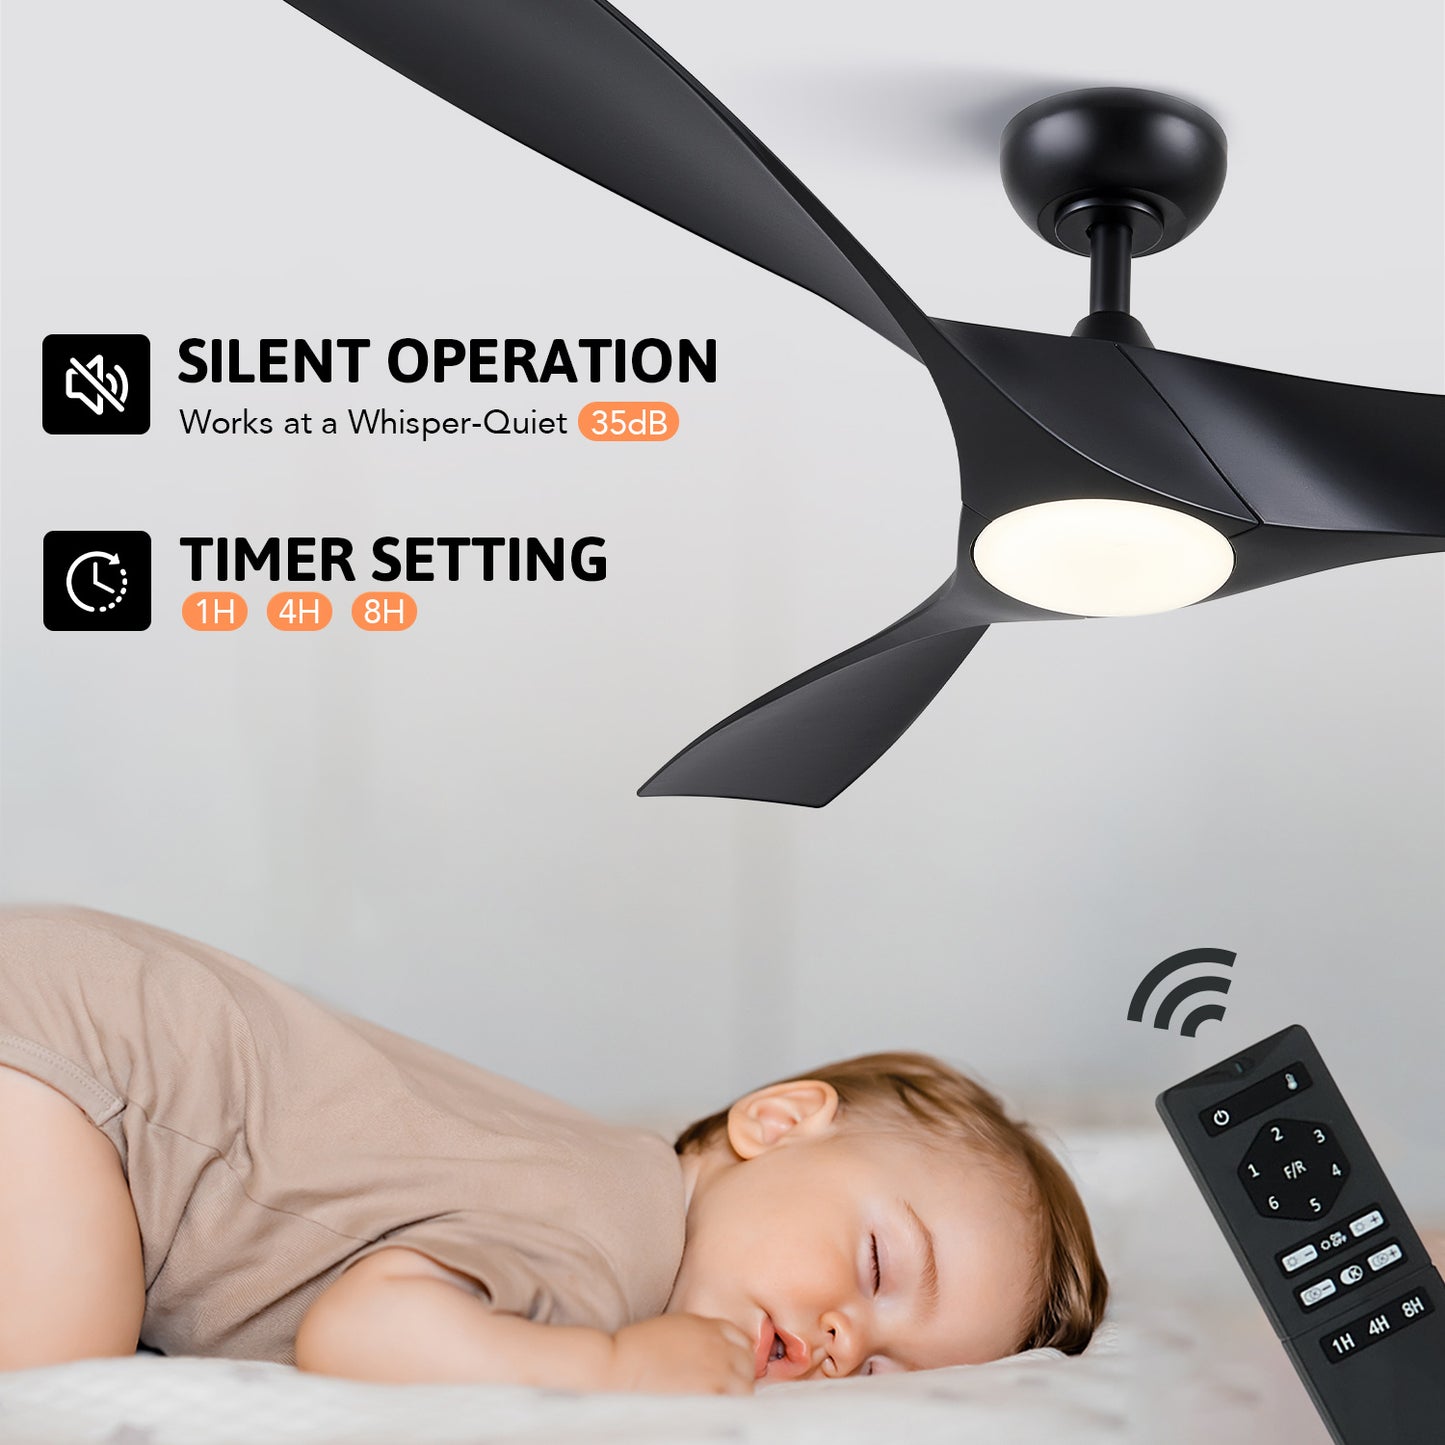 Bestco 52" Ceiling Fan with Lights 3 Blades Remote Control Timer and Adjustable Height for Bedroom Living Room Kitchen Decor More